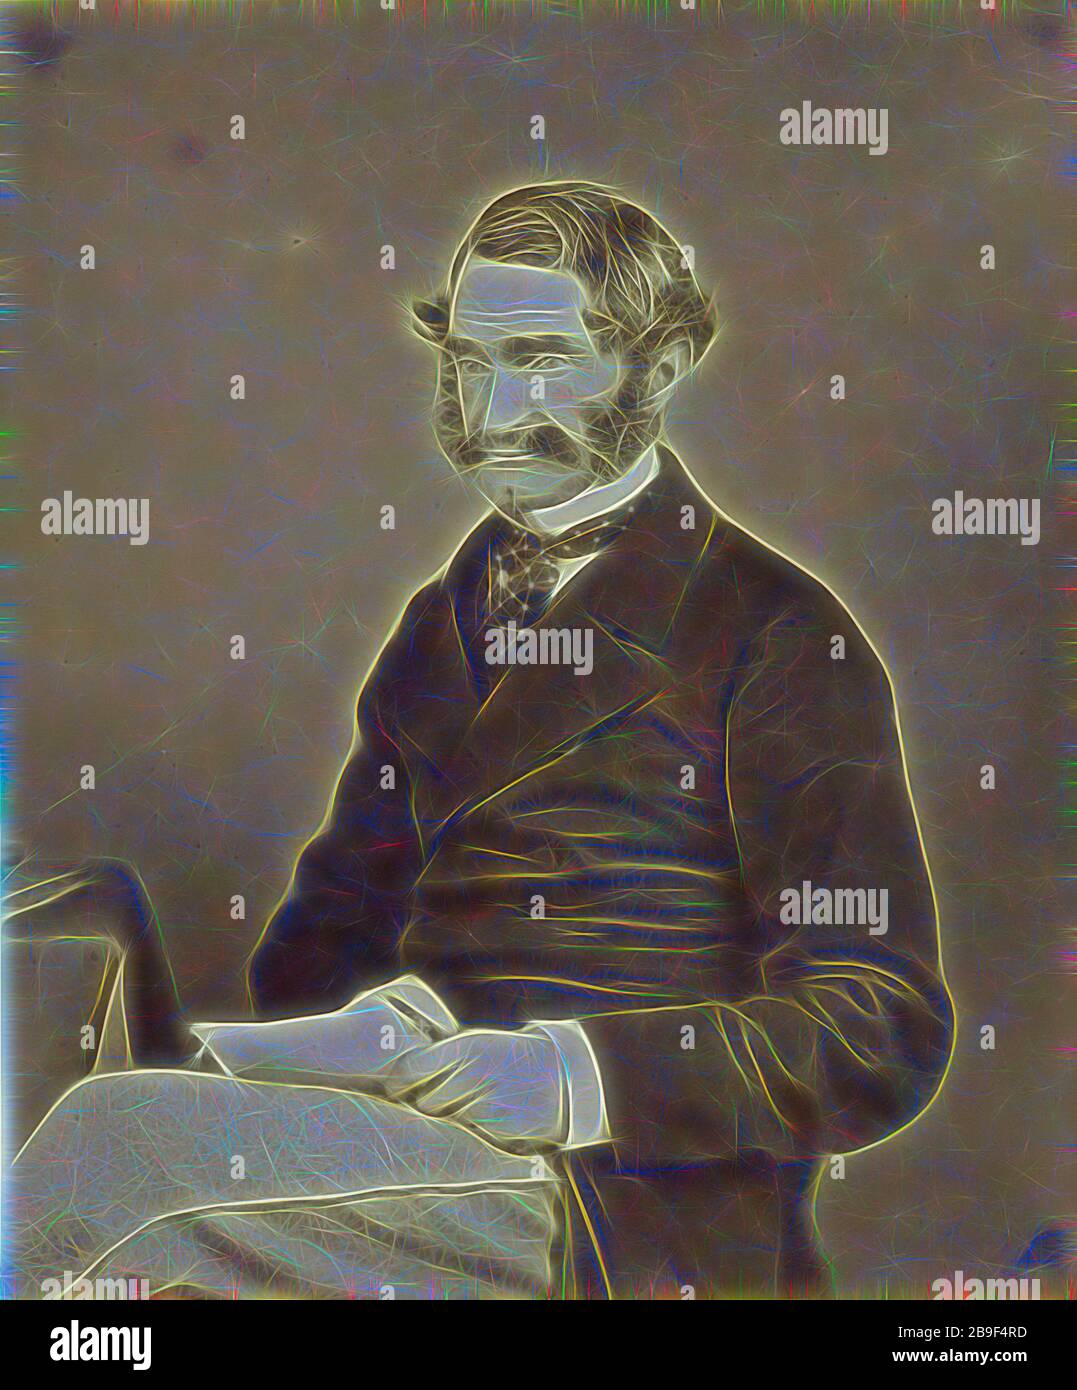 Portrait of General Sir Hope Grant, Felice Beato (English, born Italy, 1832 - 1909), Henry Hering (British, 1814 - 1893), China, 1860, Albumen silver print, Reimagined by Gibon, design of warm cheerful glowing of brightness and light rays radiance. Classic art reinvented with a modern twist. Photography inspired by futurism, embracing dynamic energy of modern technology, movement, speed and revolutionize culture. Stock Photo